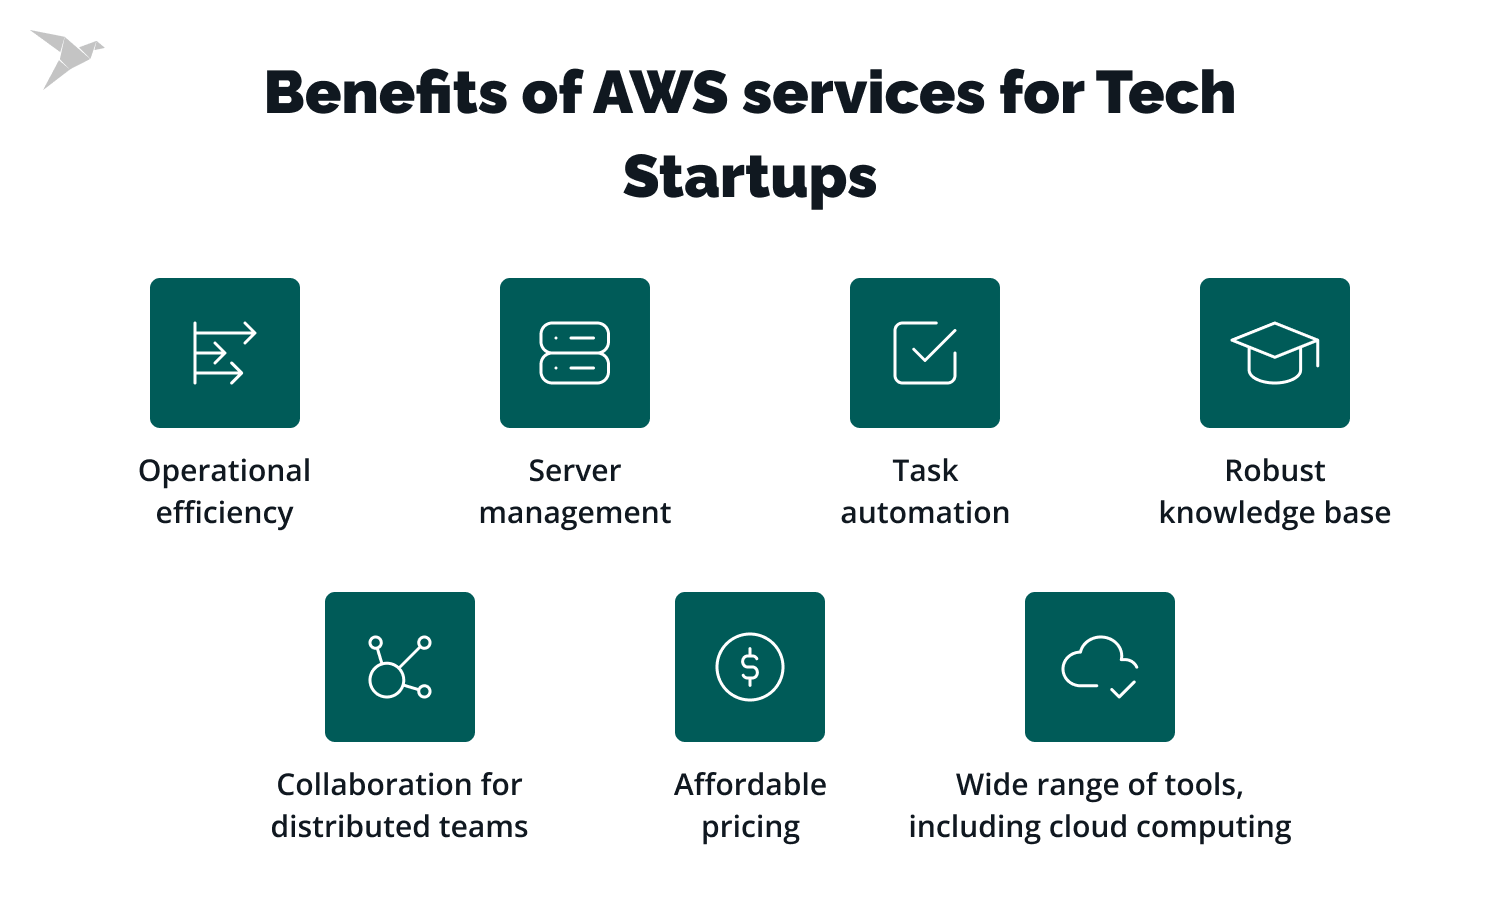 Benefits of AWS services For Tech Startups